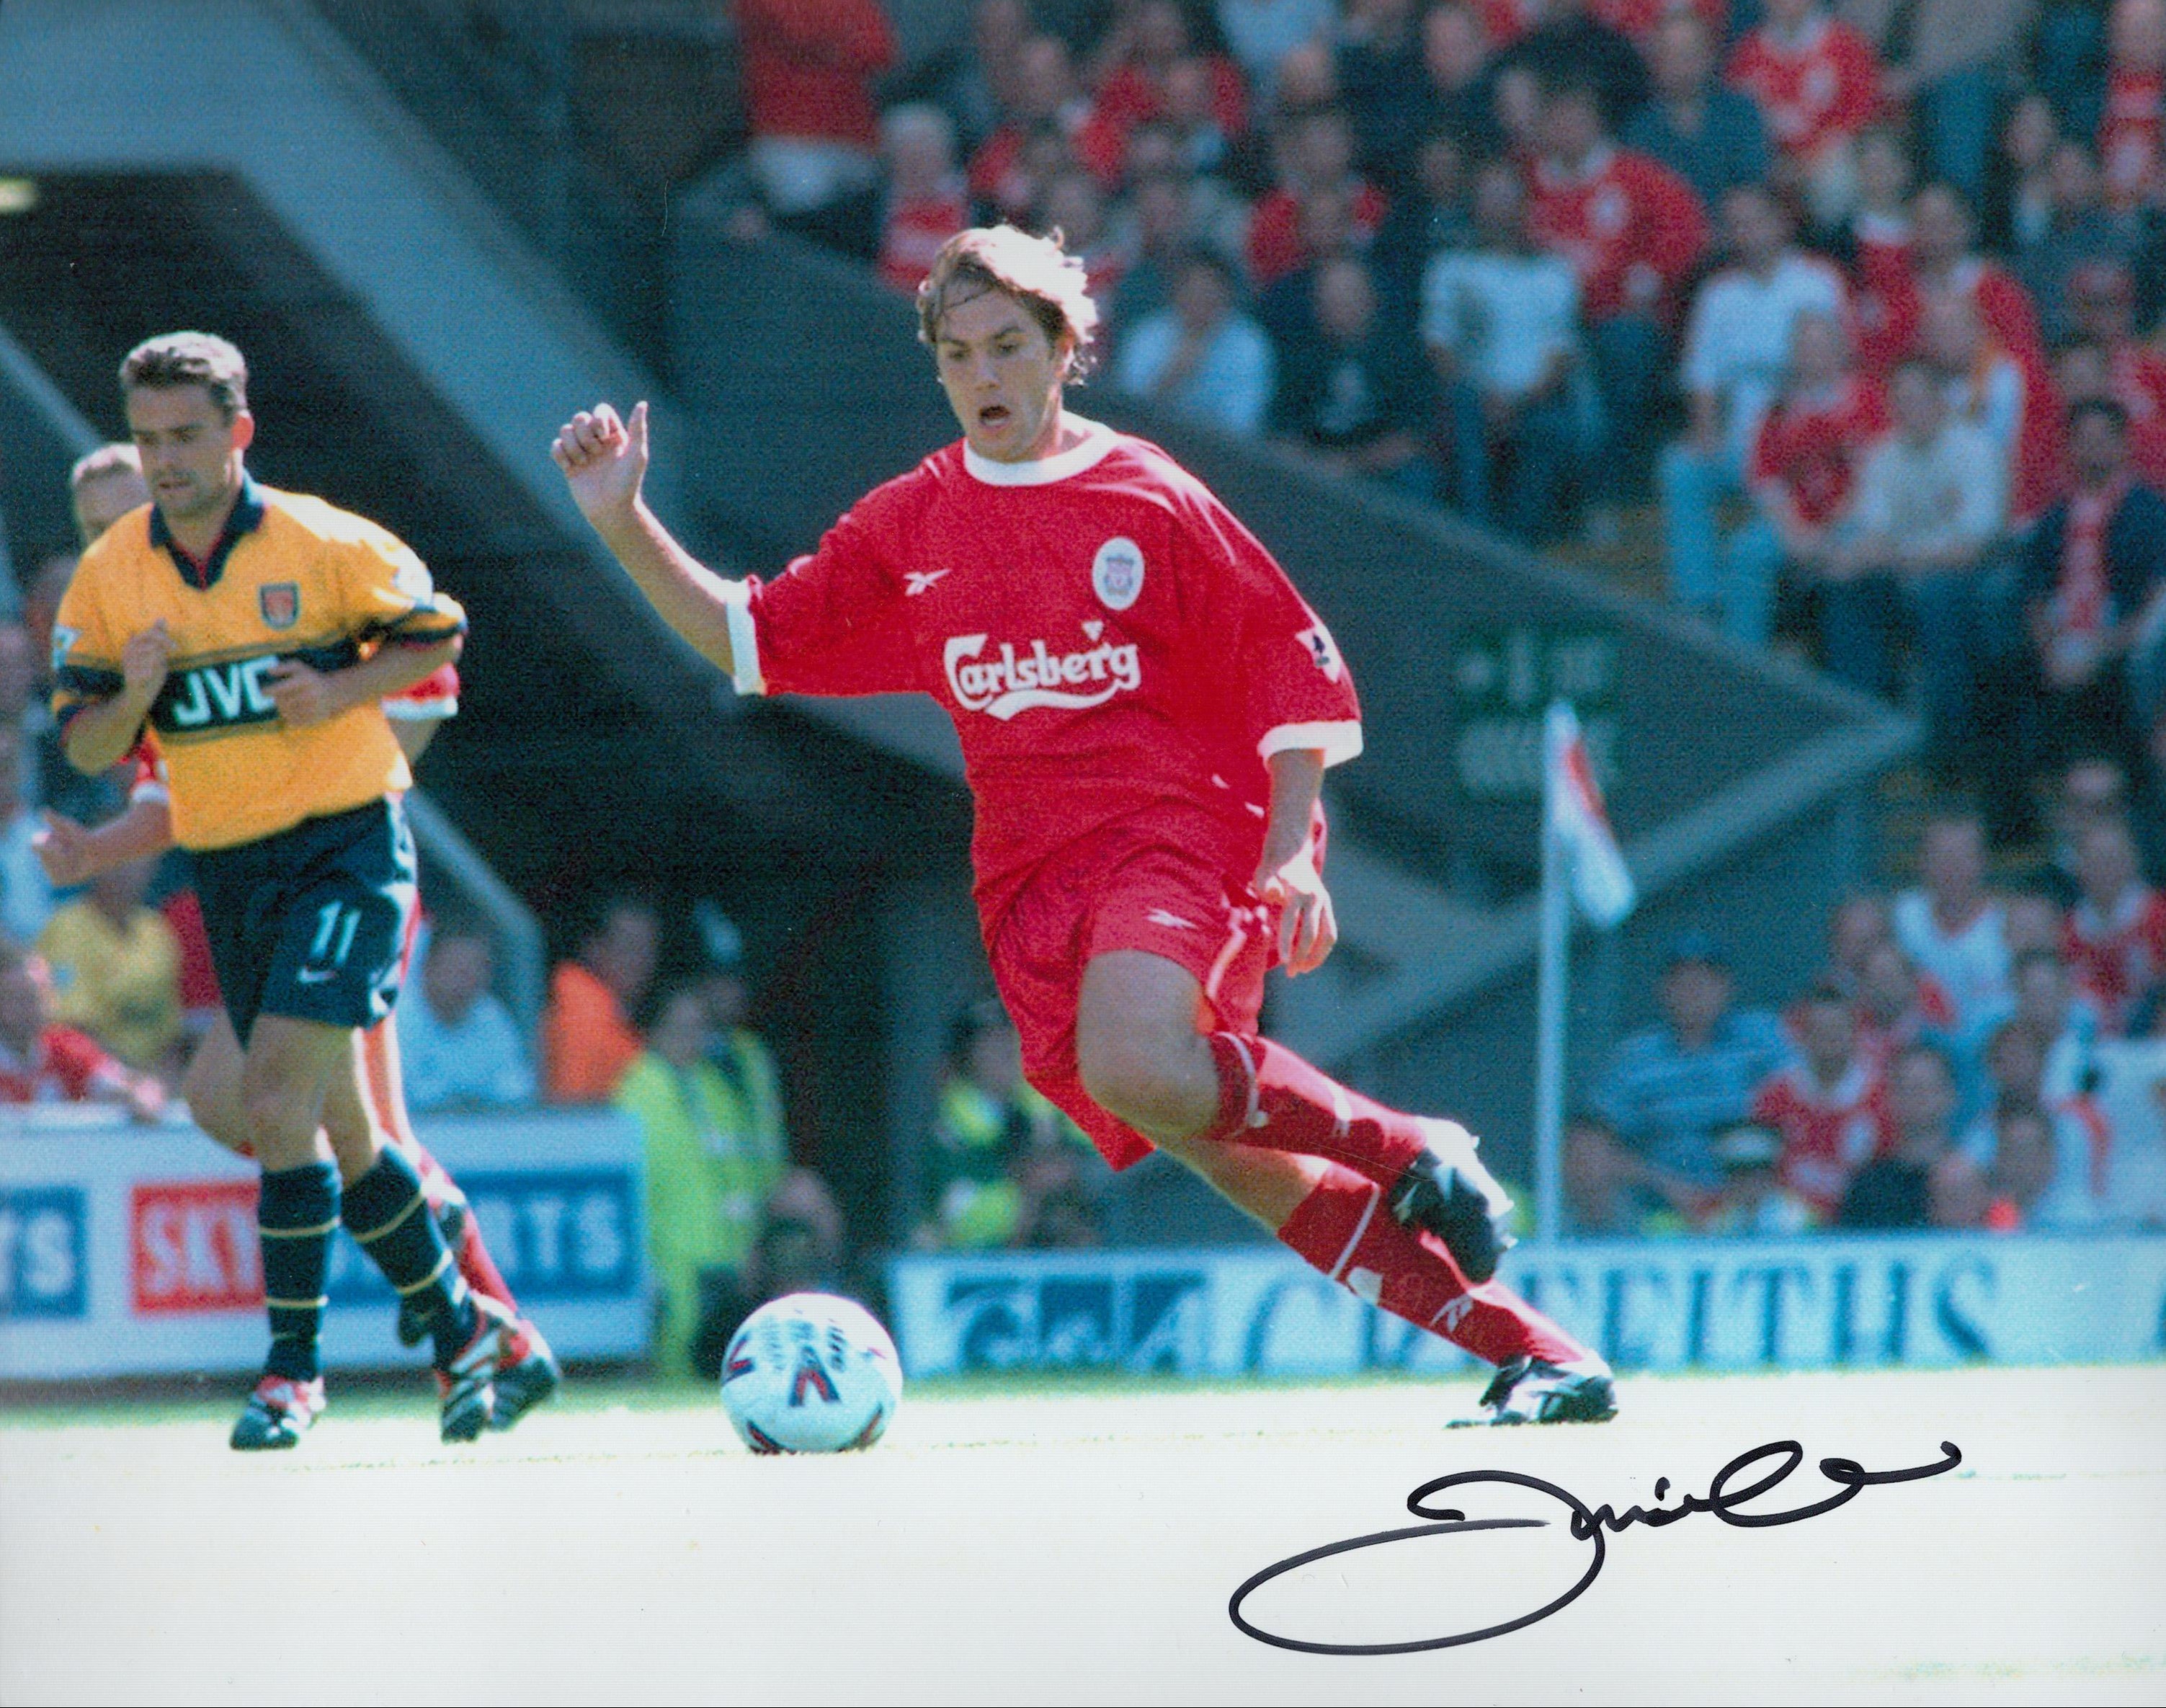 Football Jason McAteer signed Liverpool 10x8 colour photo. Good condition. All autographs come